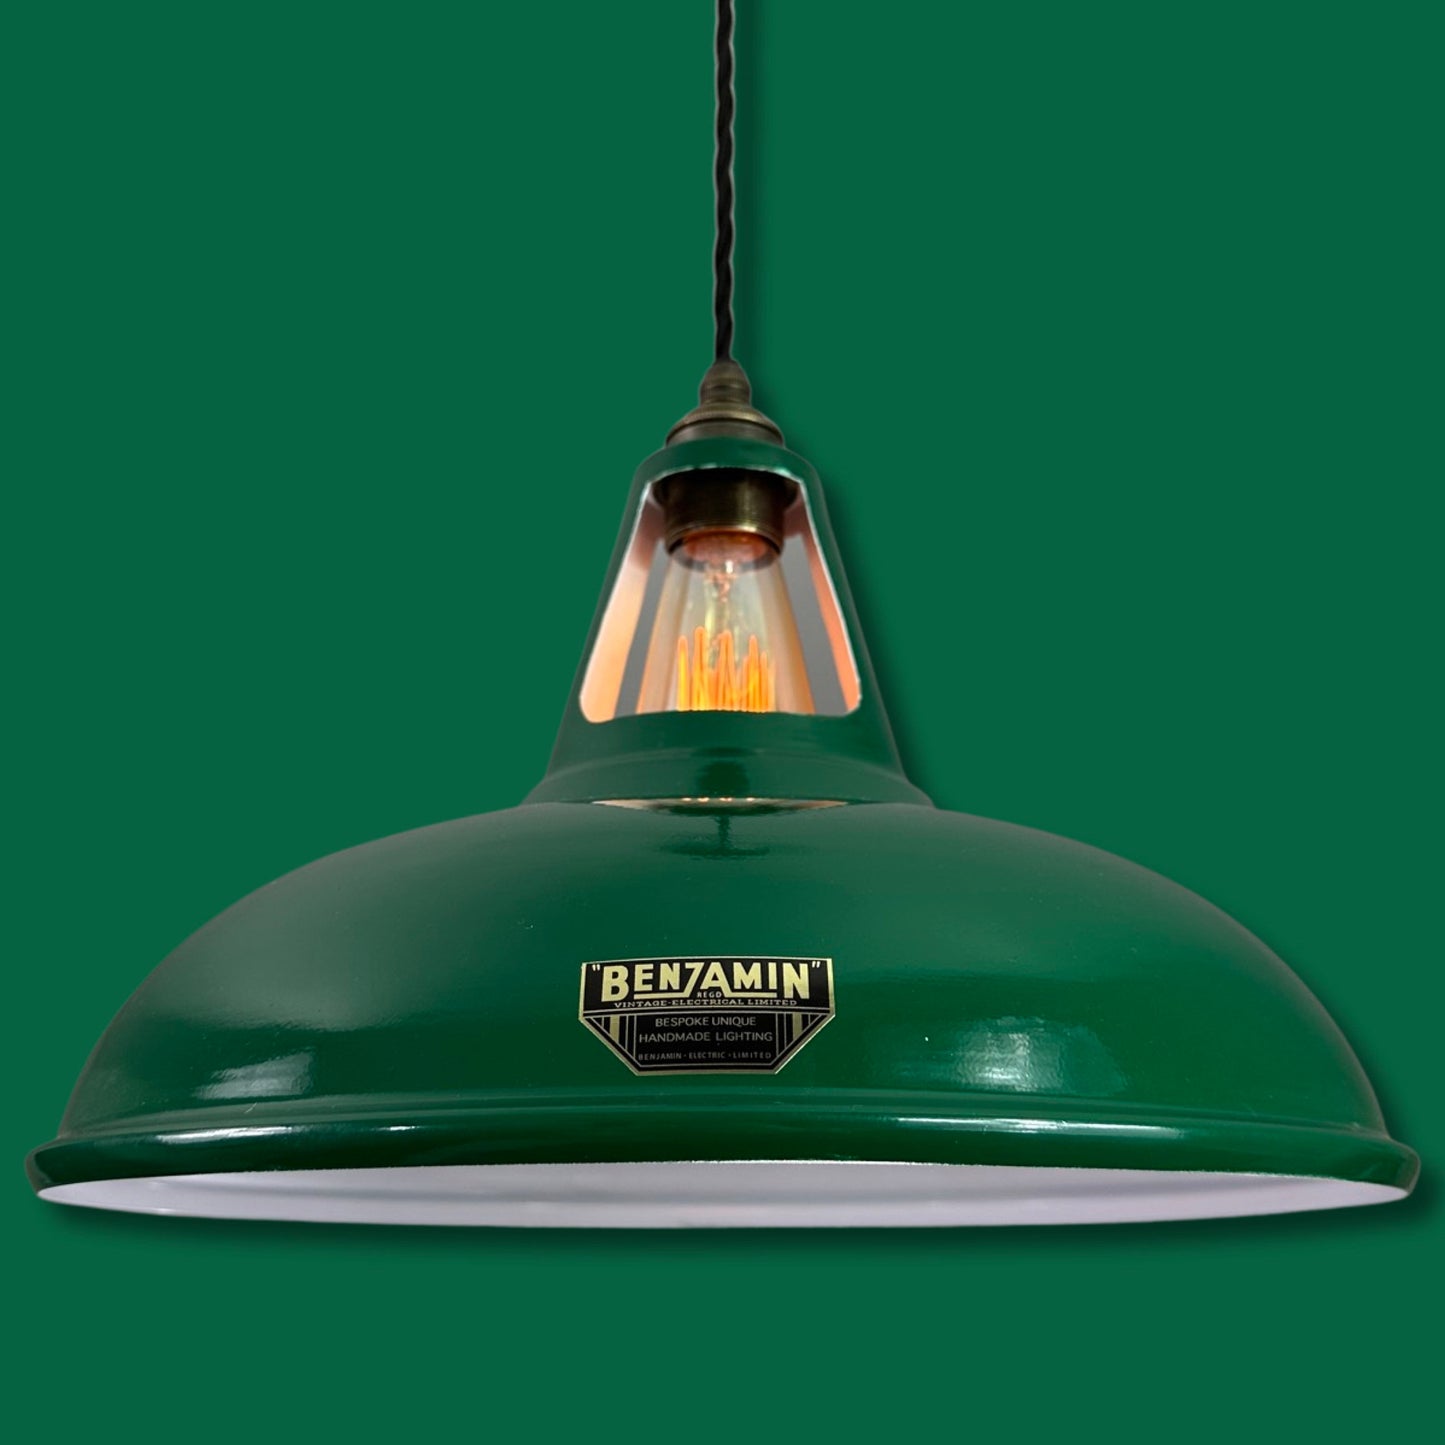 Cawston XL ~ Racing Green Solid Shade Slot Design Pendant Set Light | Ceiling Dining Room | Kitchen Table | Vintage Filament Bulb | 14 Inch